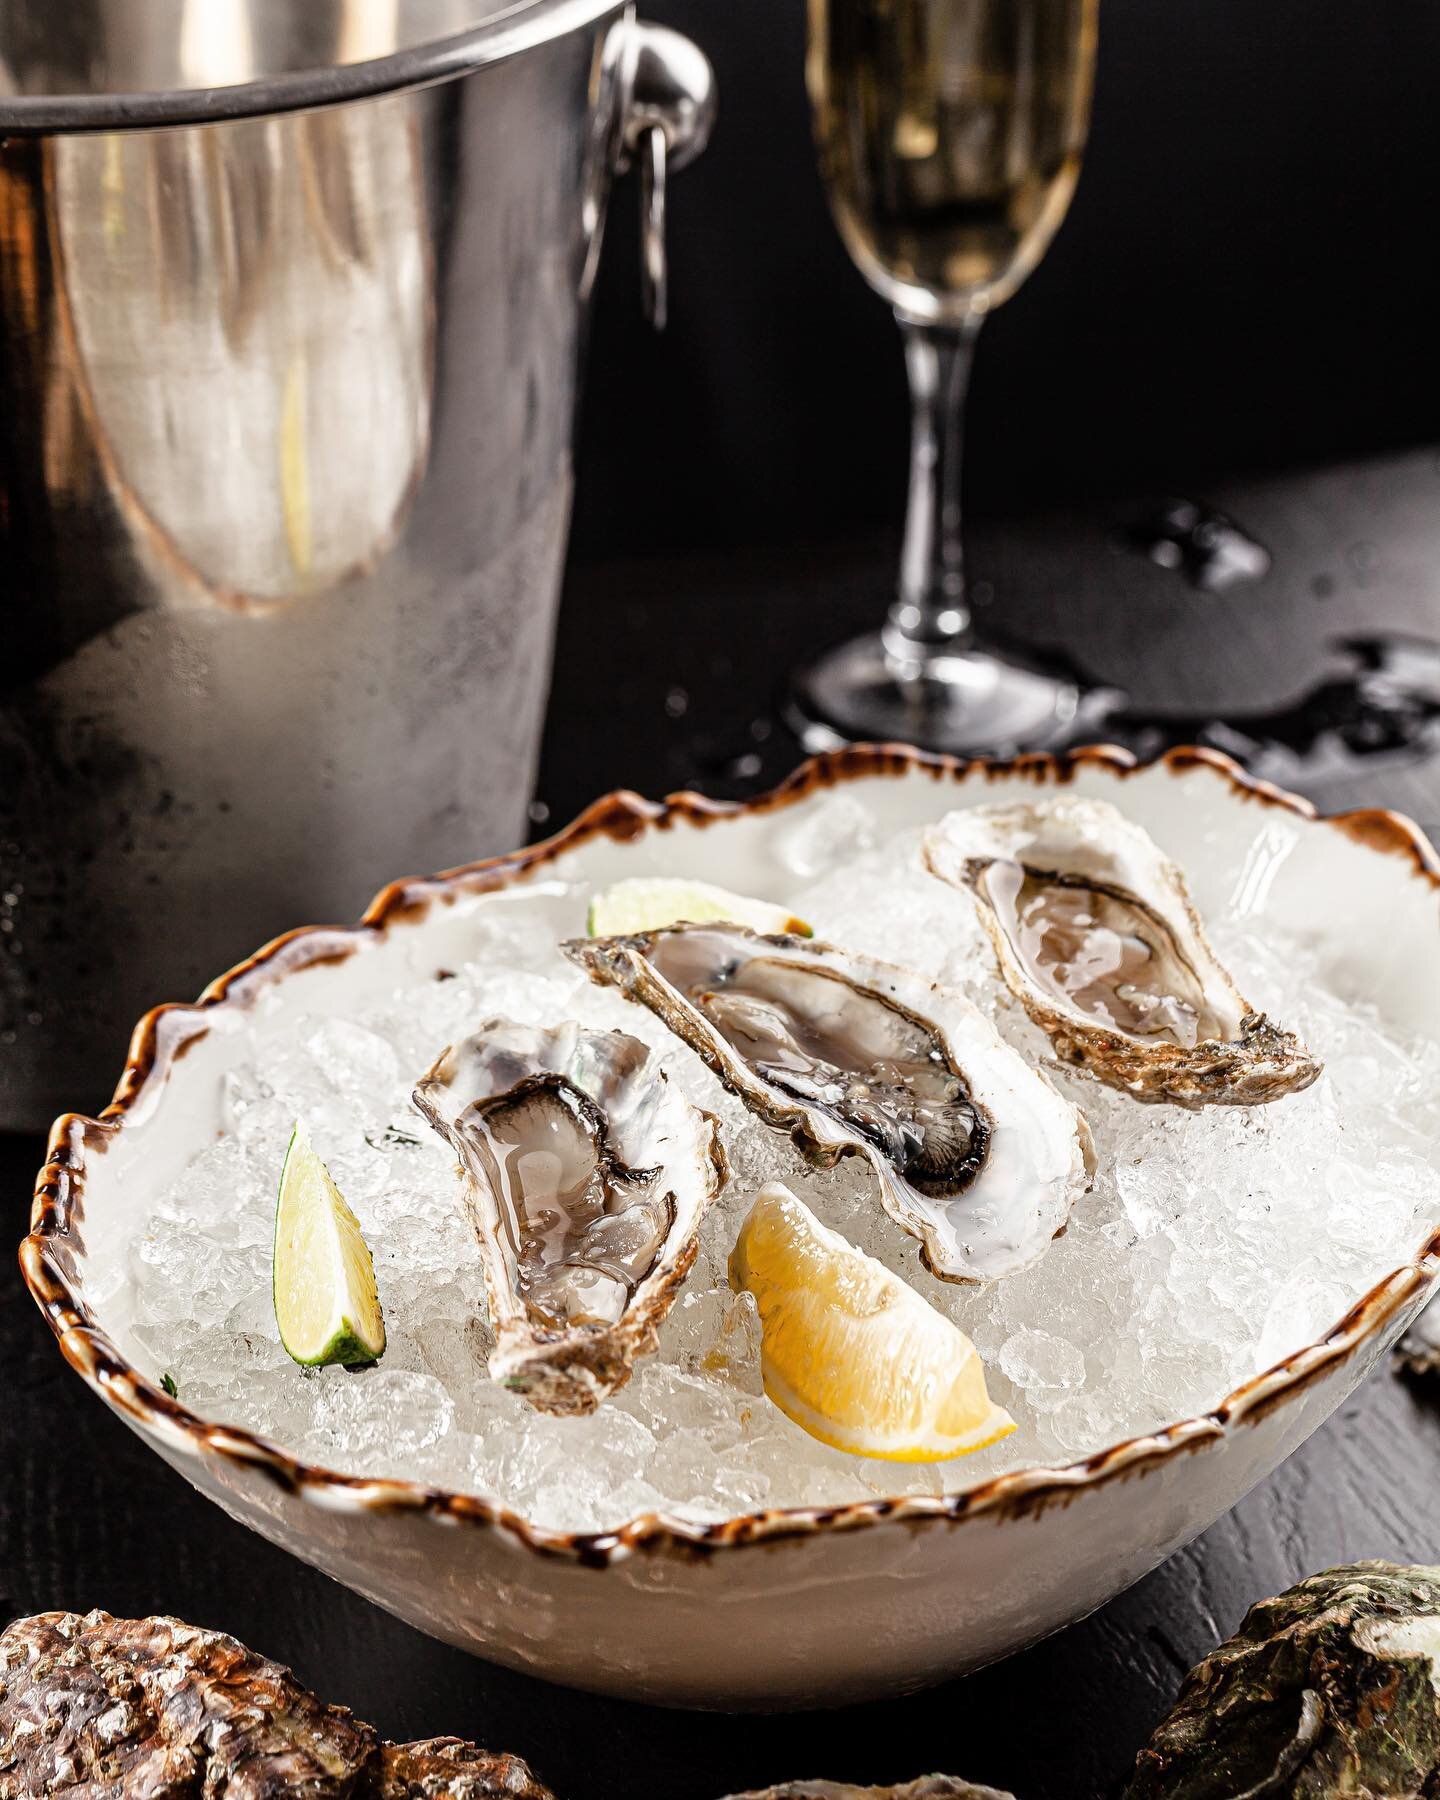 Just 10 days to go until our very first Oyster &amp; Champagne event🥂🦪 
Tickets are running low so if you haven&rsquo;t already, get yours now by following the link in bio 👆🏼  Our experienced staff will guide you through this unforgettable gastro